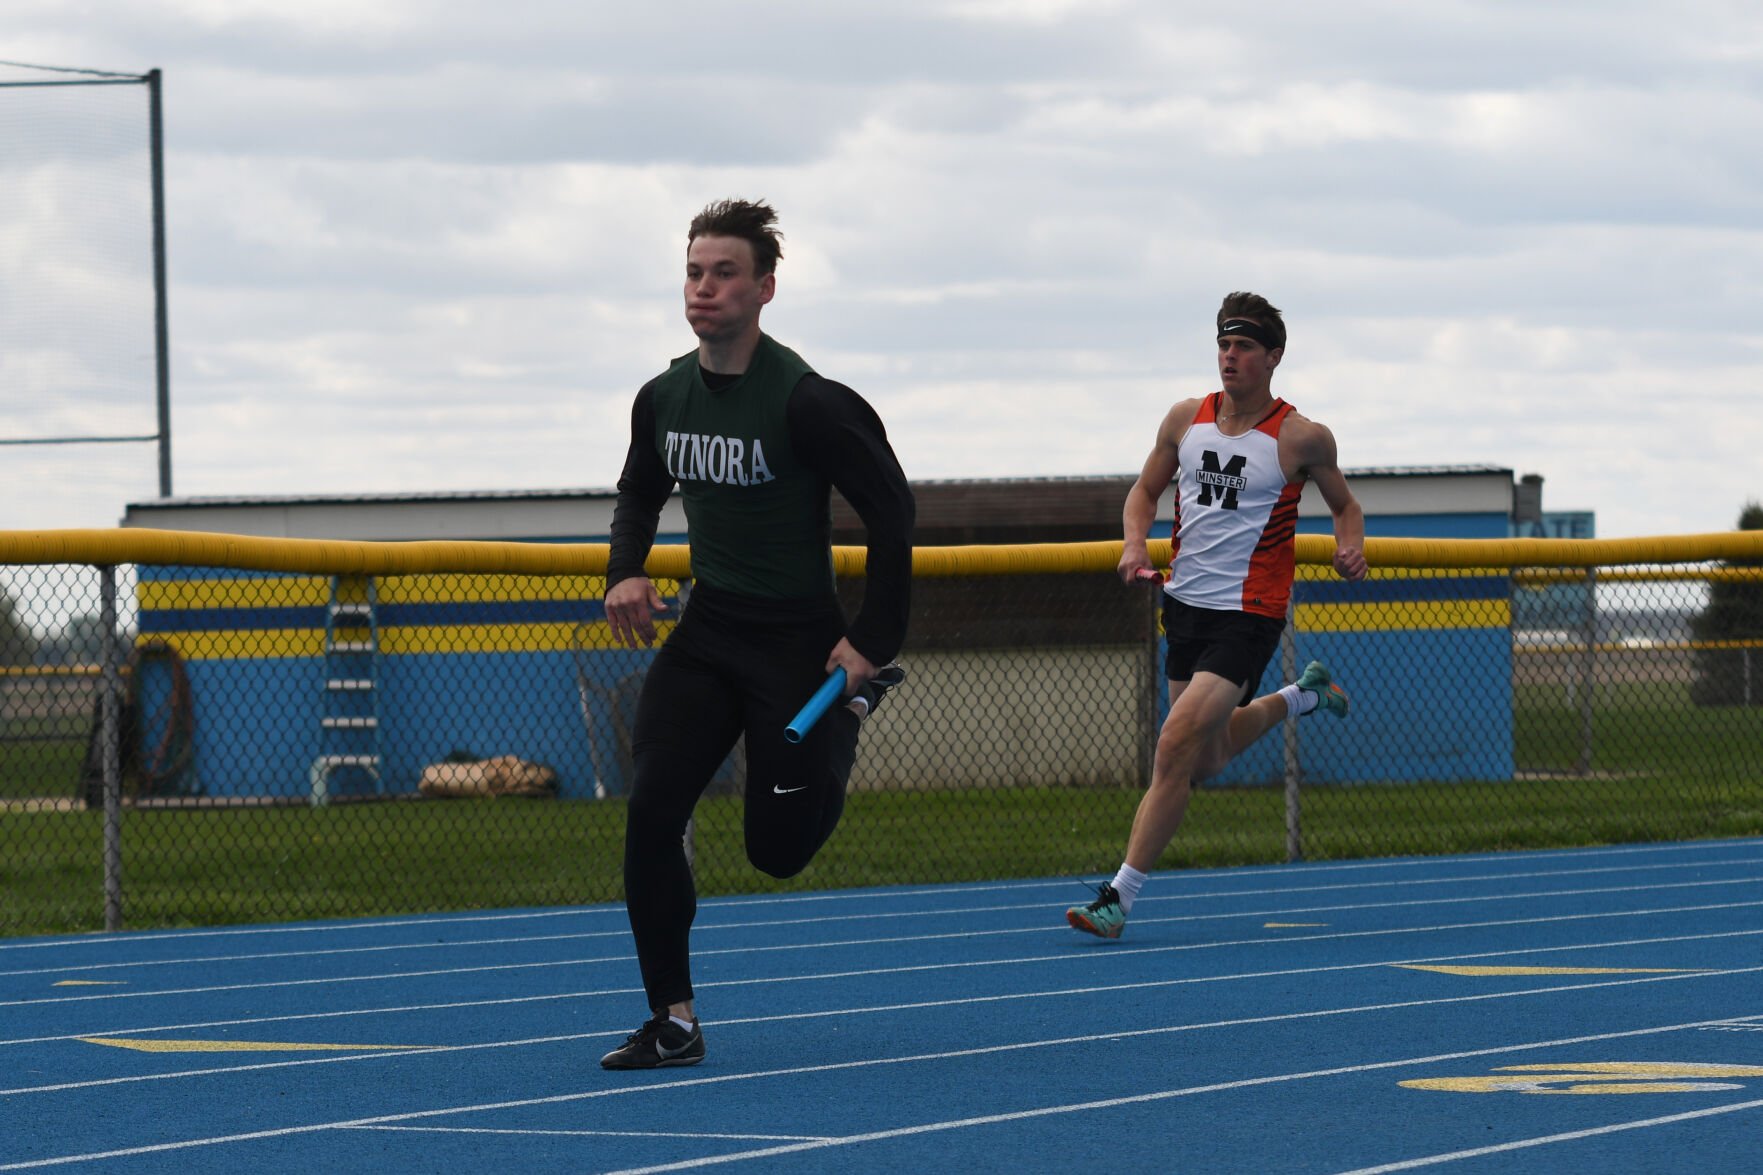 Diller Invitational: Tinora Boys, Patrick Henry Girls Secure Strong Second Place Finishes